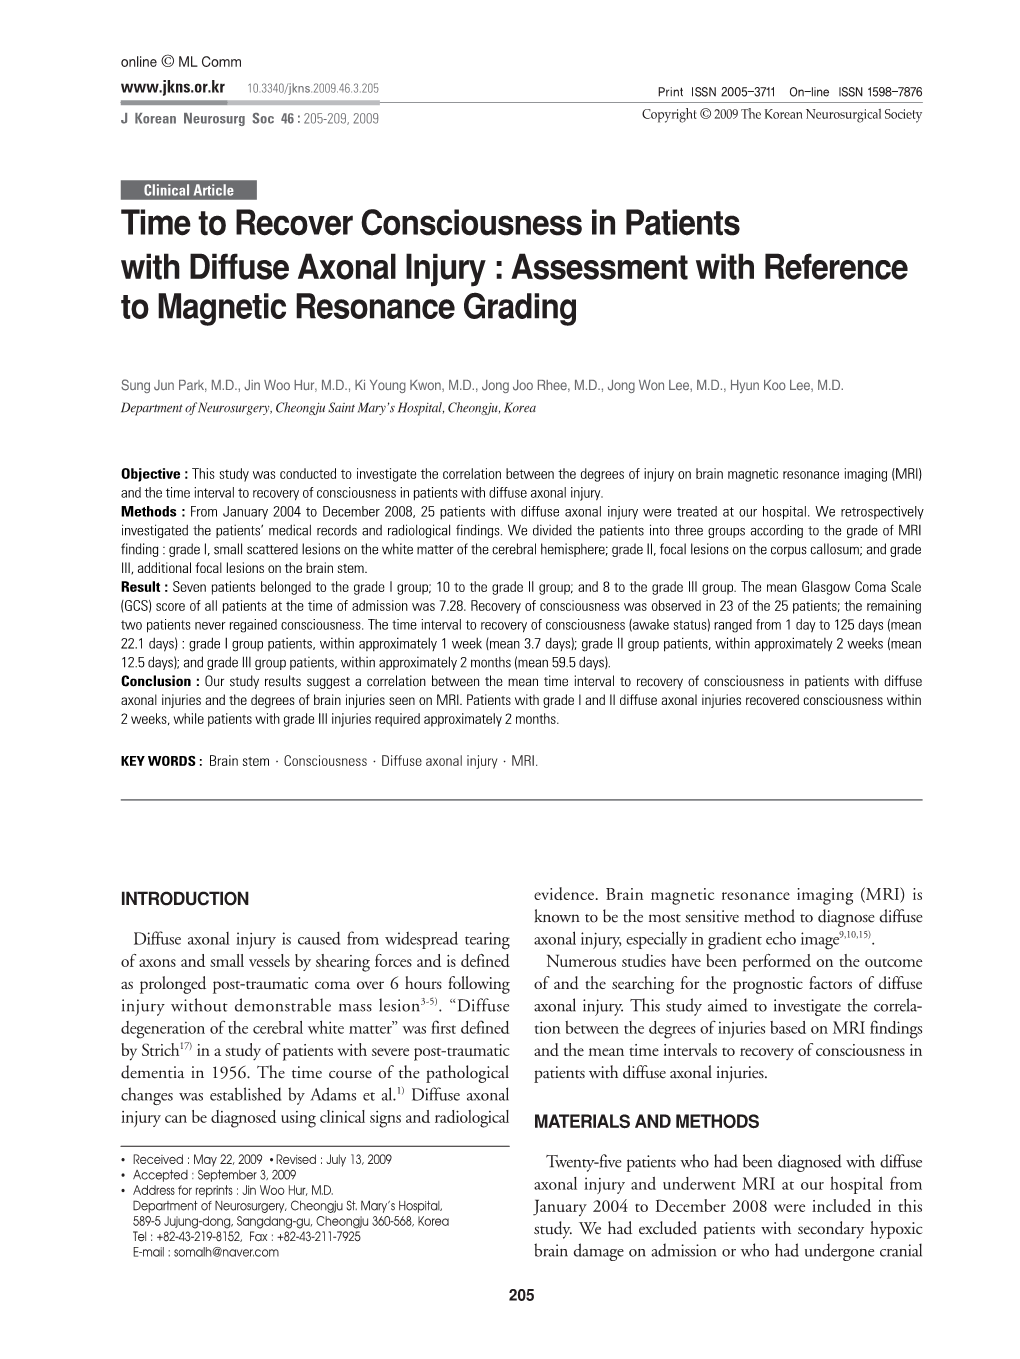 Time to Recover Consciousness in Patients with Diffuse Axonal Injury : Assessment with Reference to Magnetic Resonance Grading